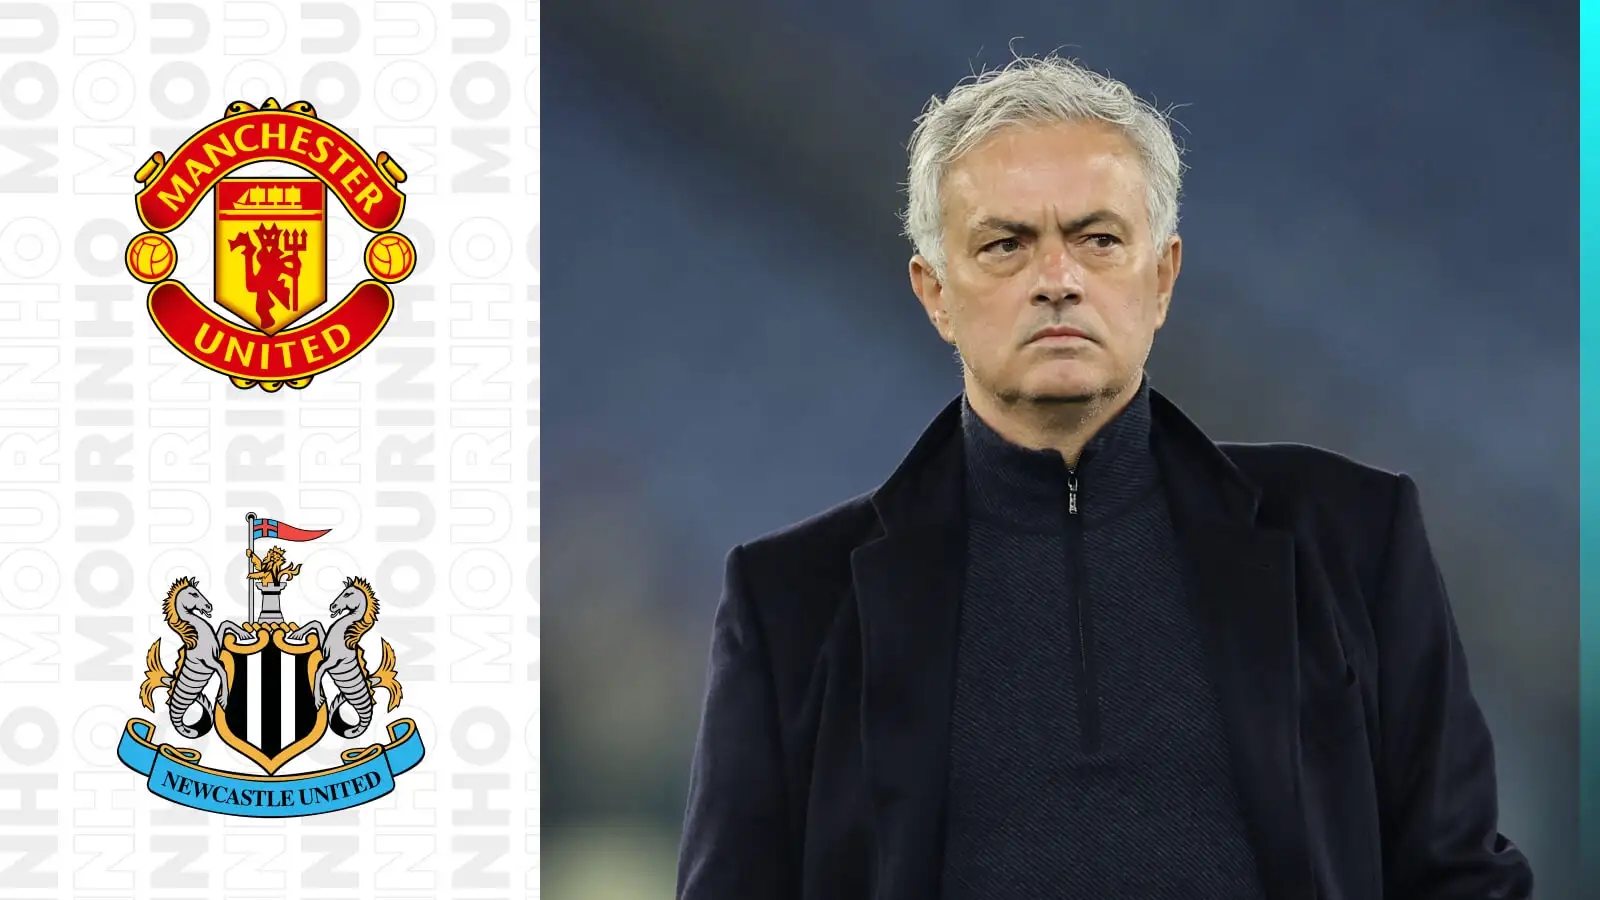 Man Utd urged to appoint ‘serial winner’ Jose Mourinho while Newcastle should stay clear